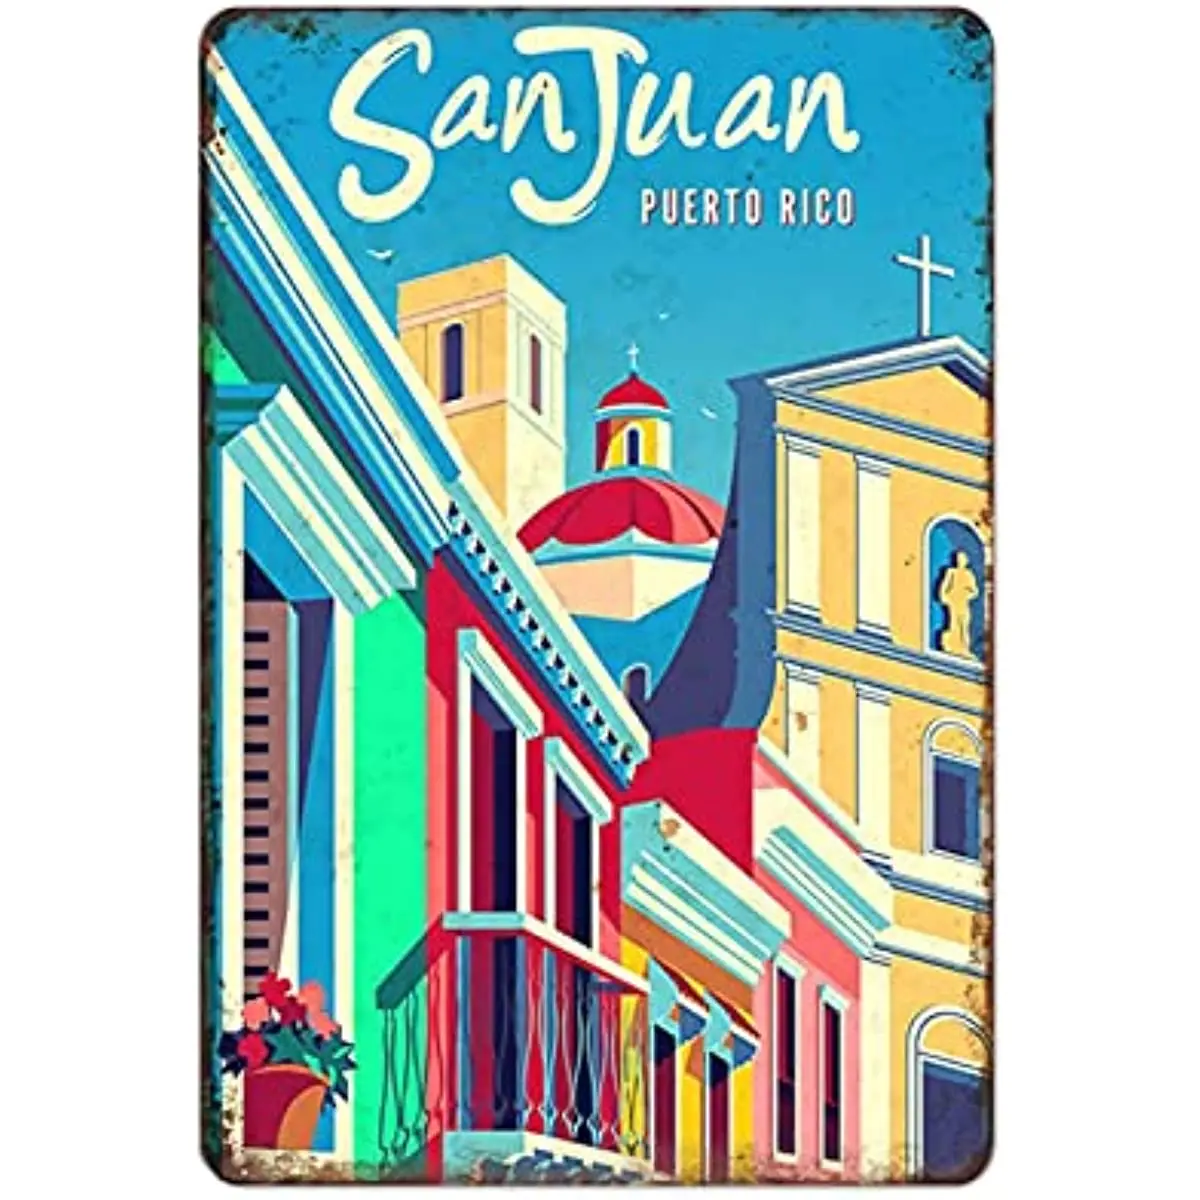 

New Metal Tin Sign Vintage Caribbean Old San Juan Cityscape Puerto Rico Island White for Home, Living Room